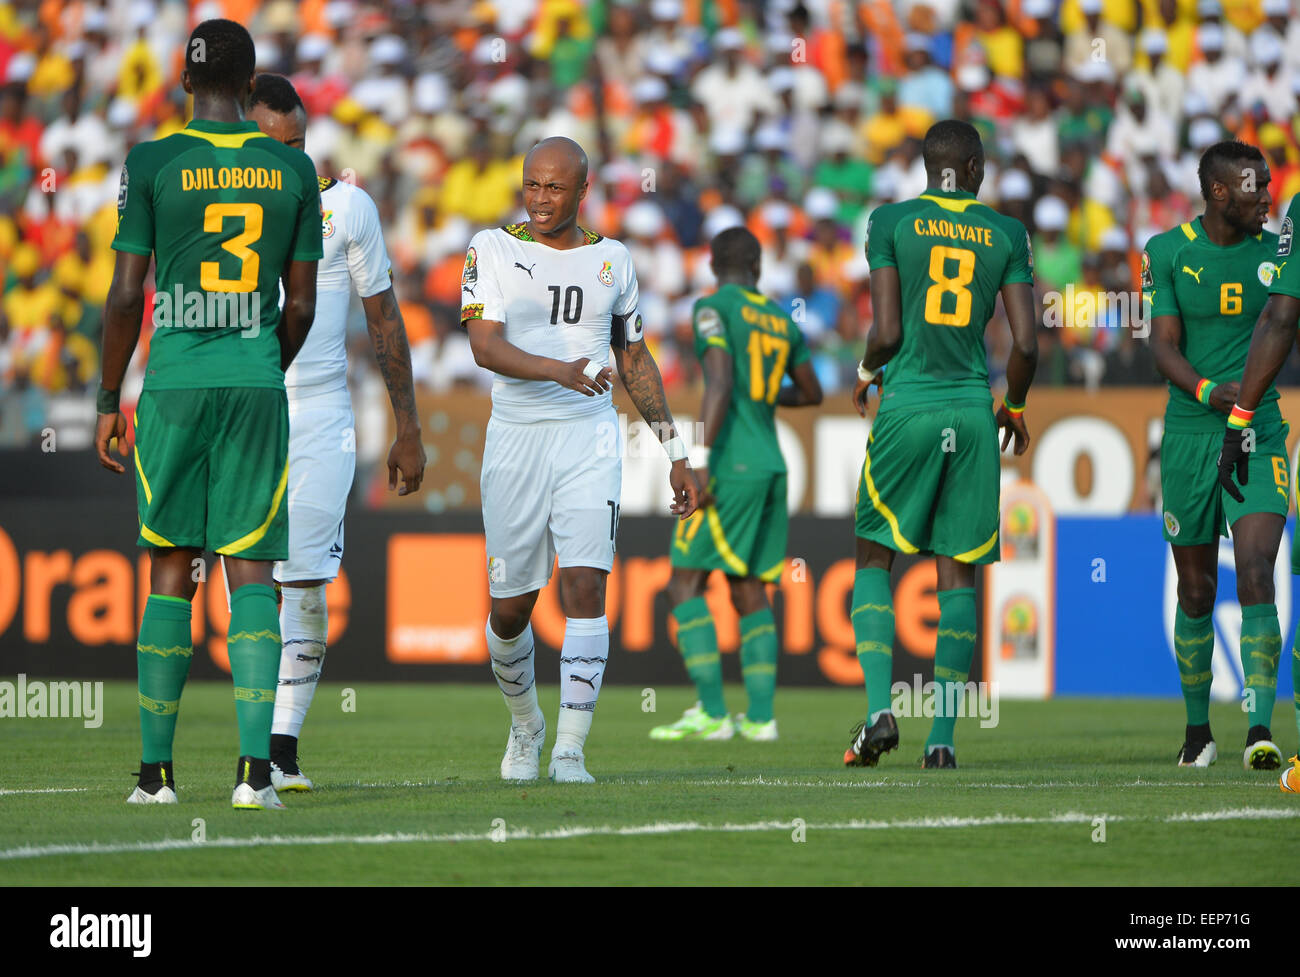 Mongomo, Equatorial Guinea. 19th Jan, 2015. African Cup of Nation football tournament. Ghana versus Senegal. Andre Ayew (GHA) © Action Plus Sports/Alamy Live News Stock Photo